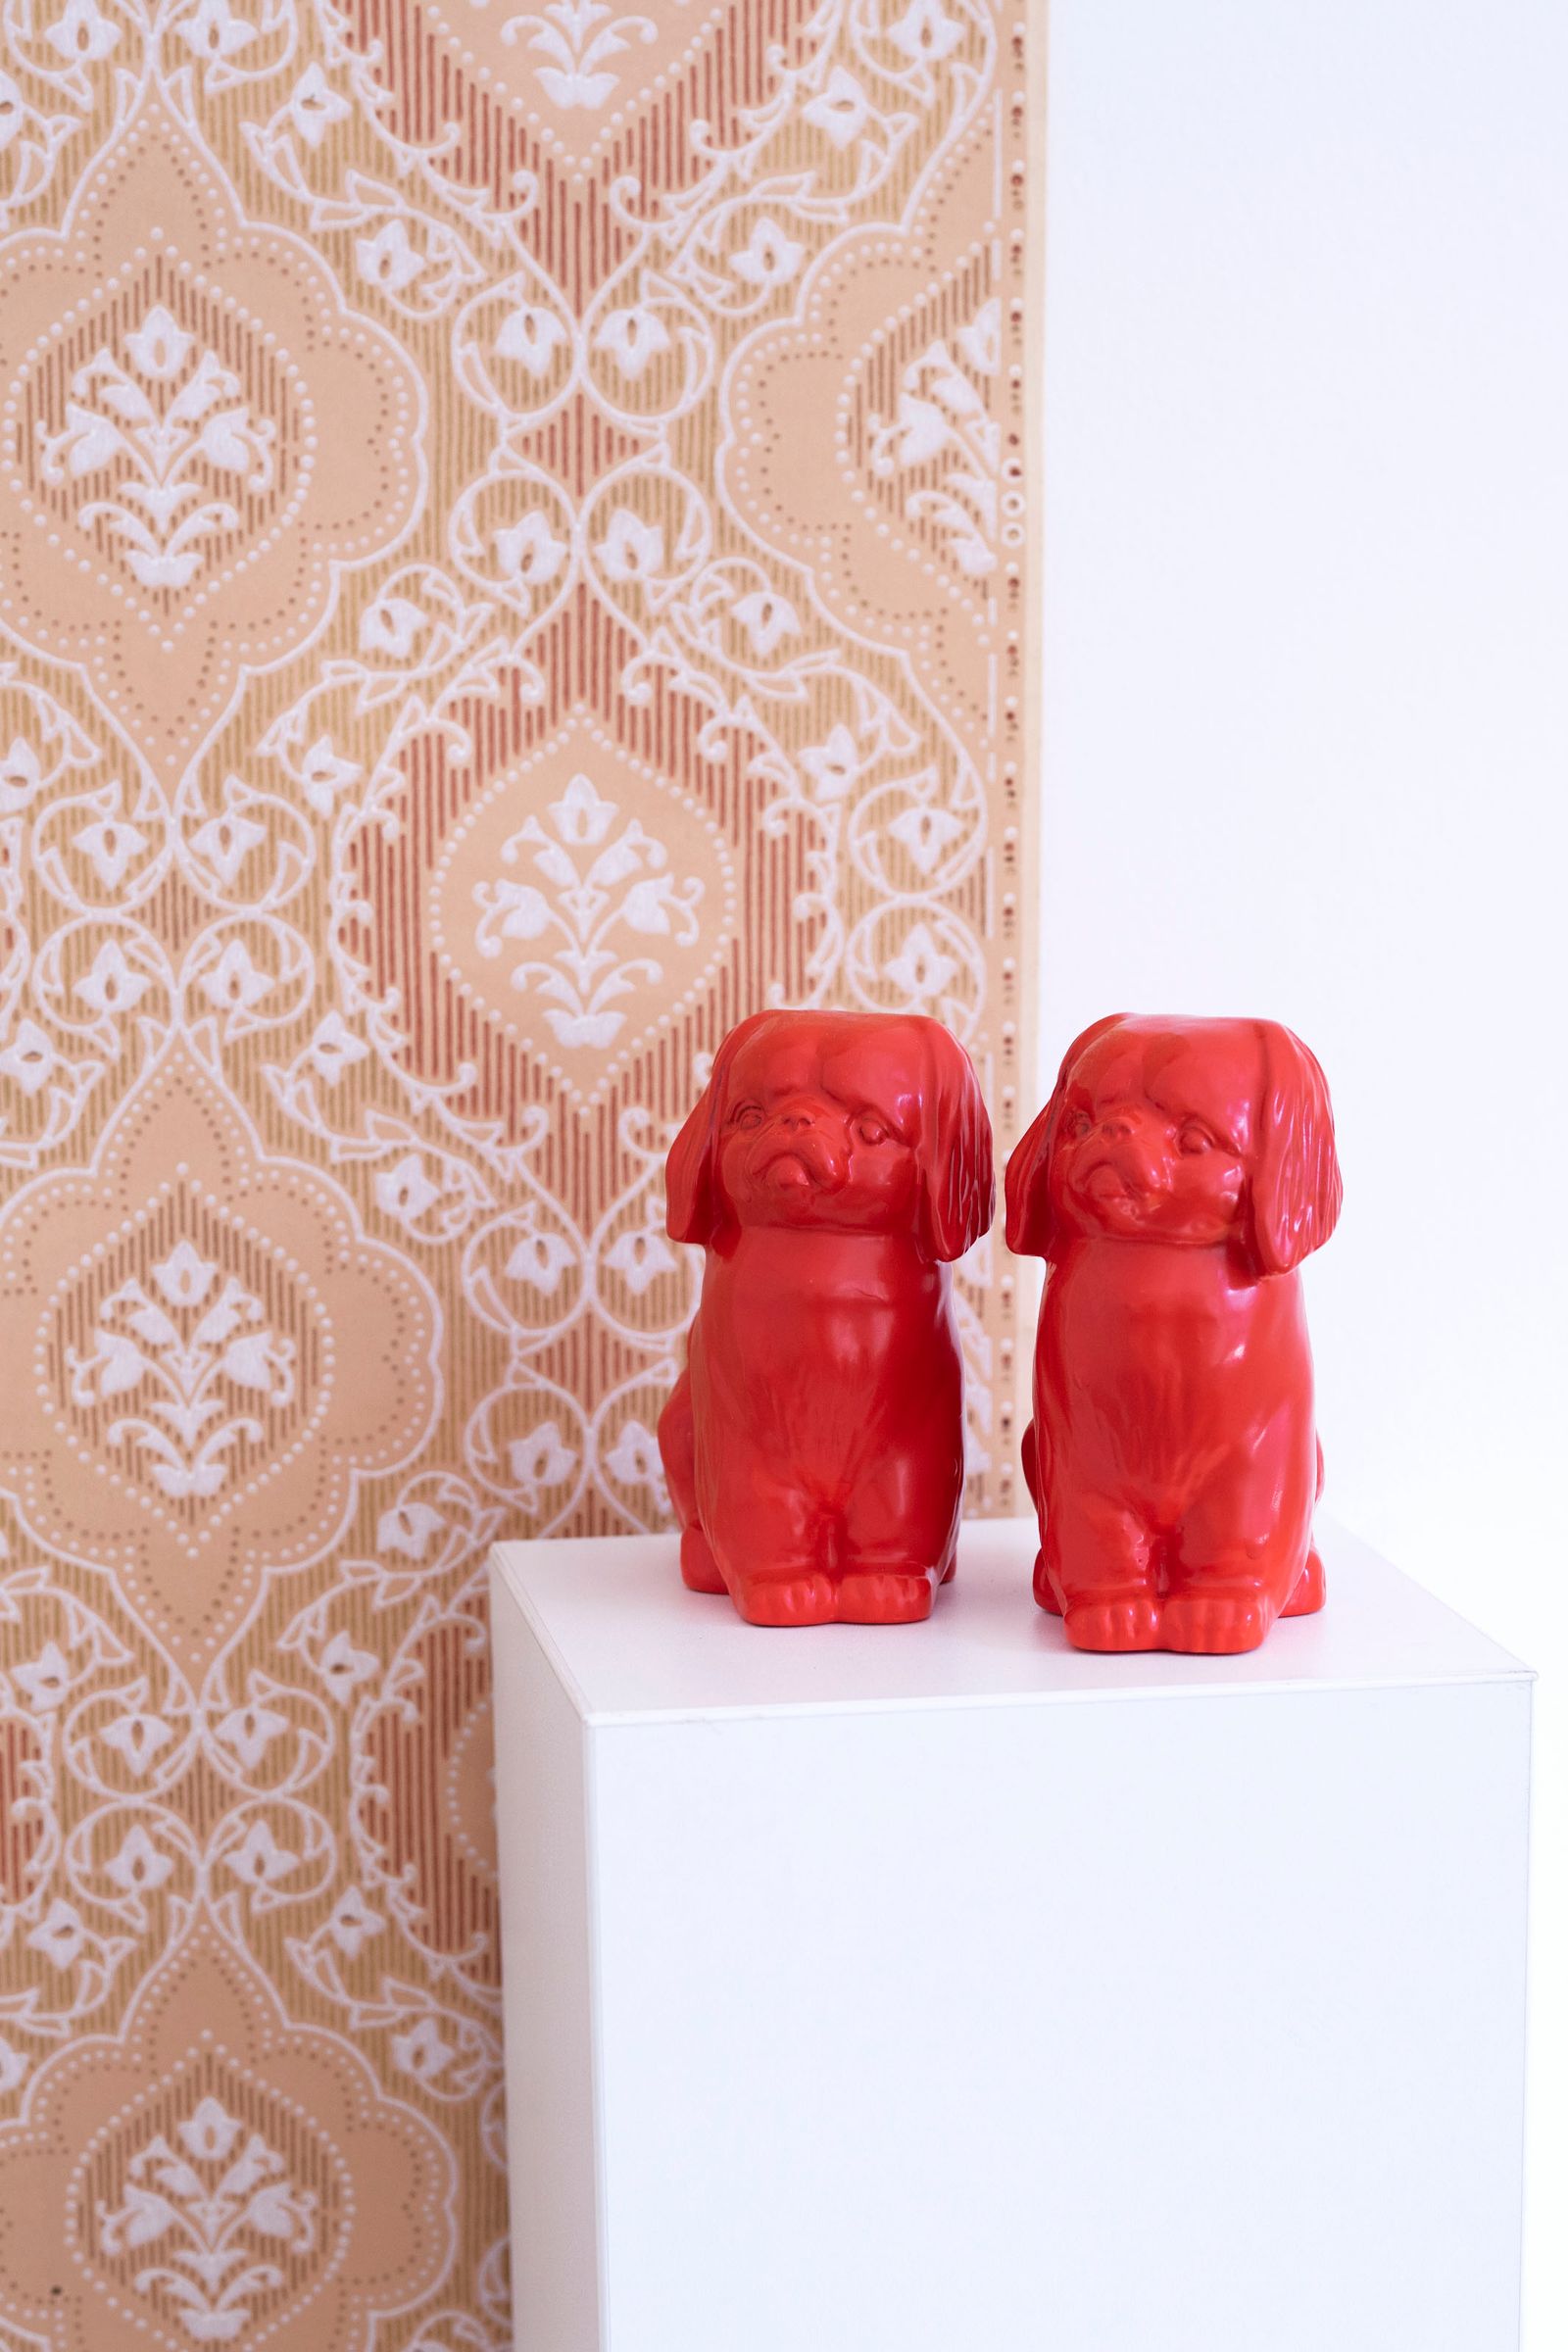 © Ira Thiessen - Red lacquered porcelain figures